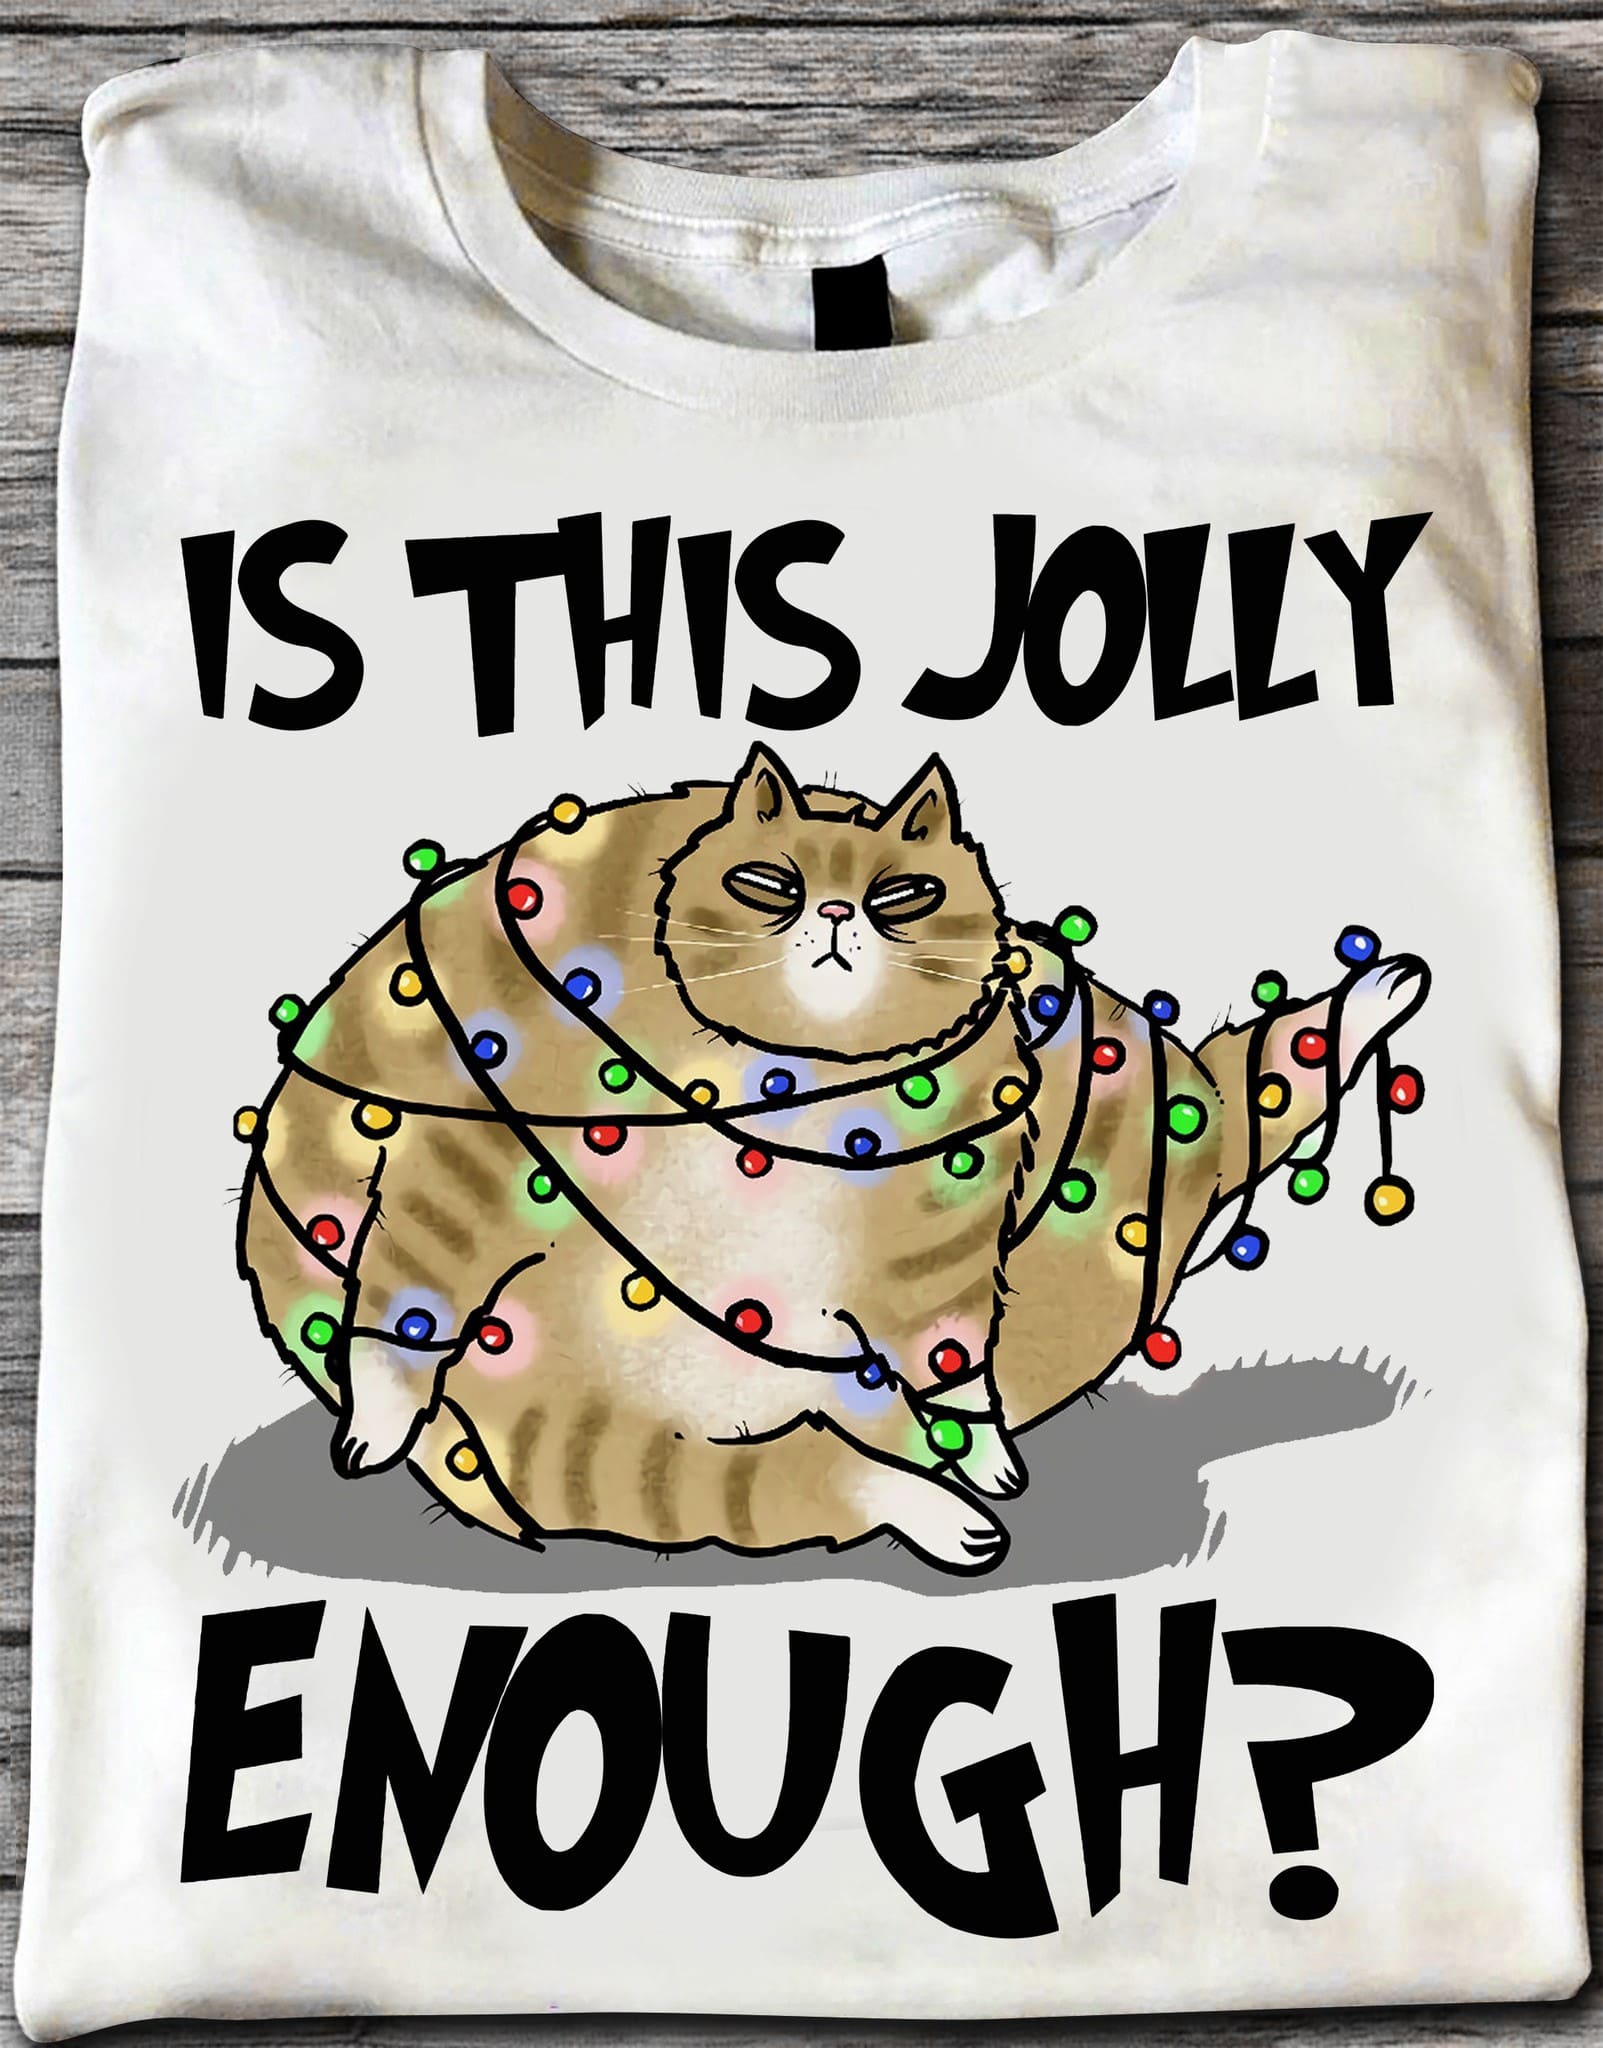 Fat Cat Christmas Lights - Is this jolly enough?